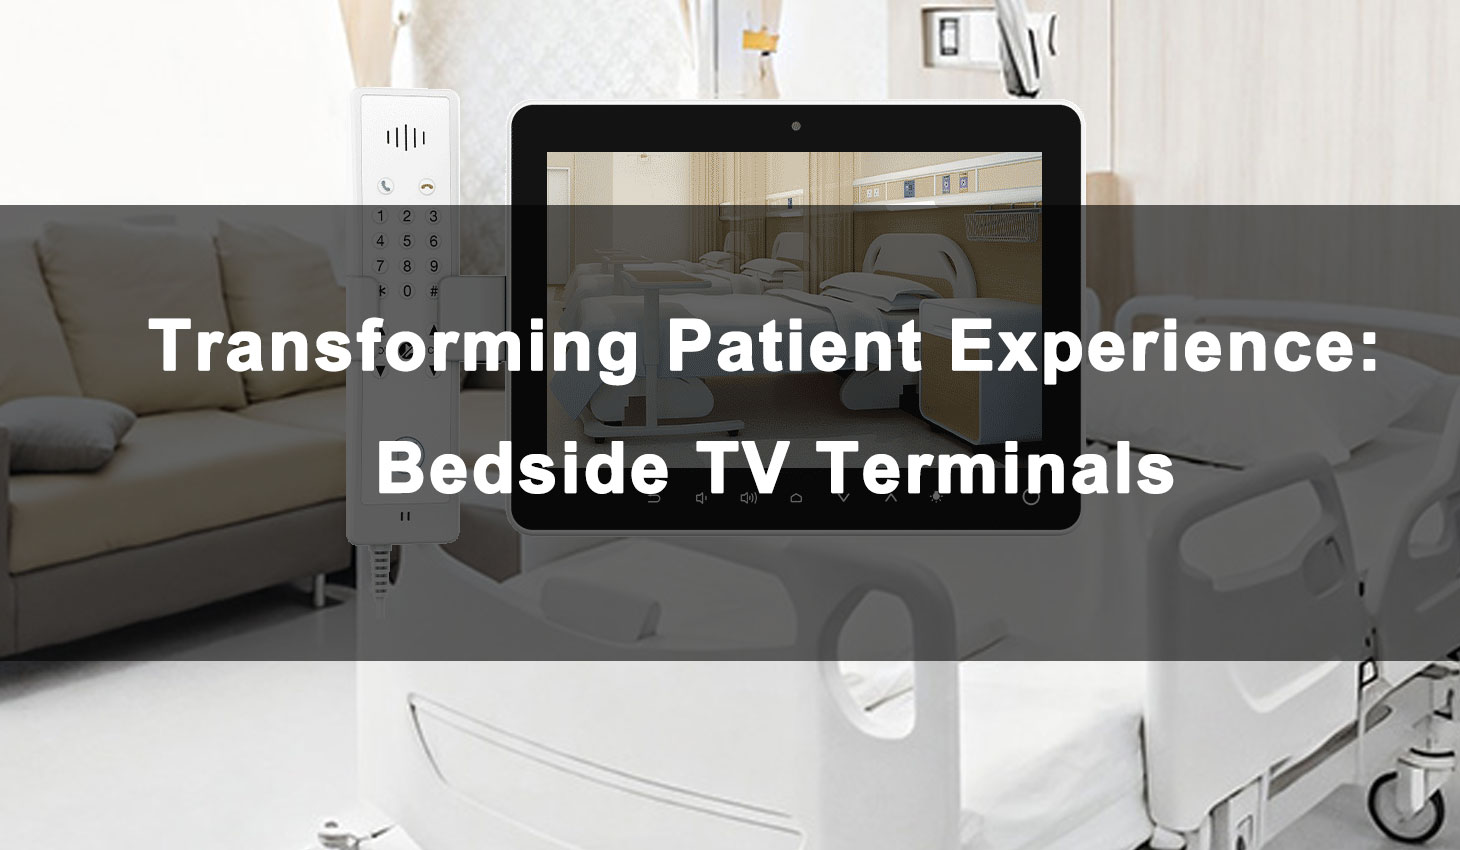 Transforming Patient Experience: Bedside TV Terminals